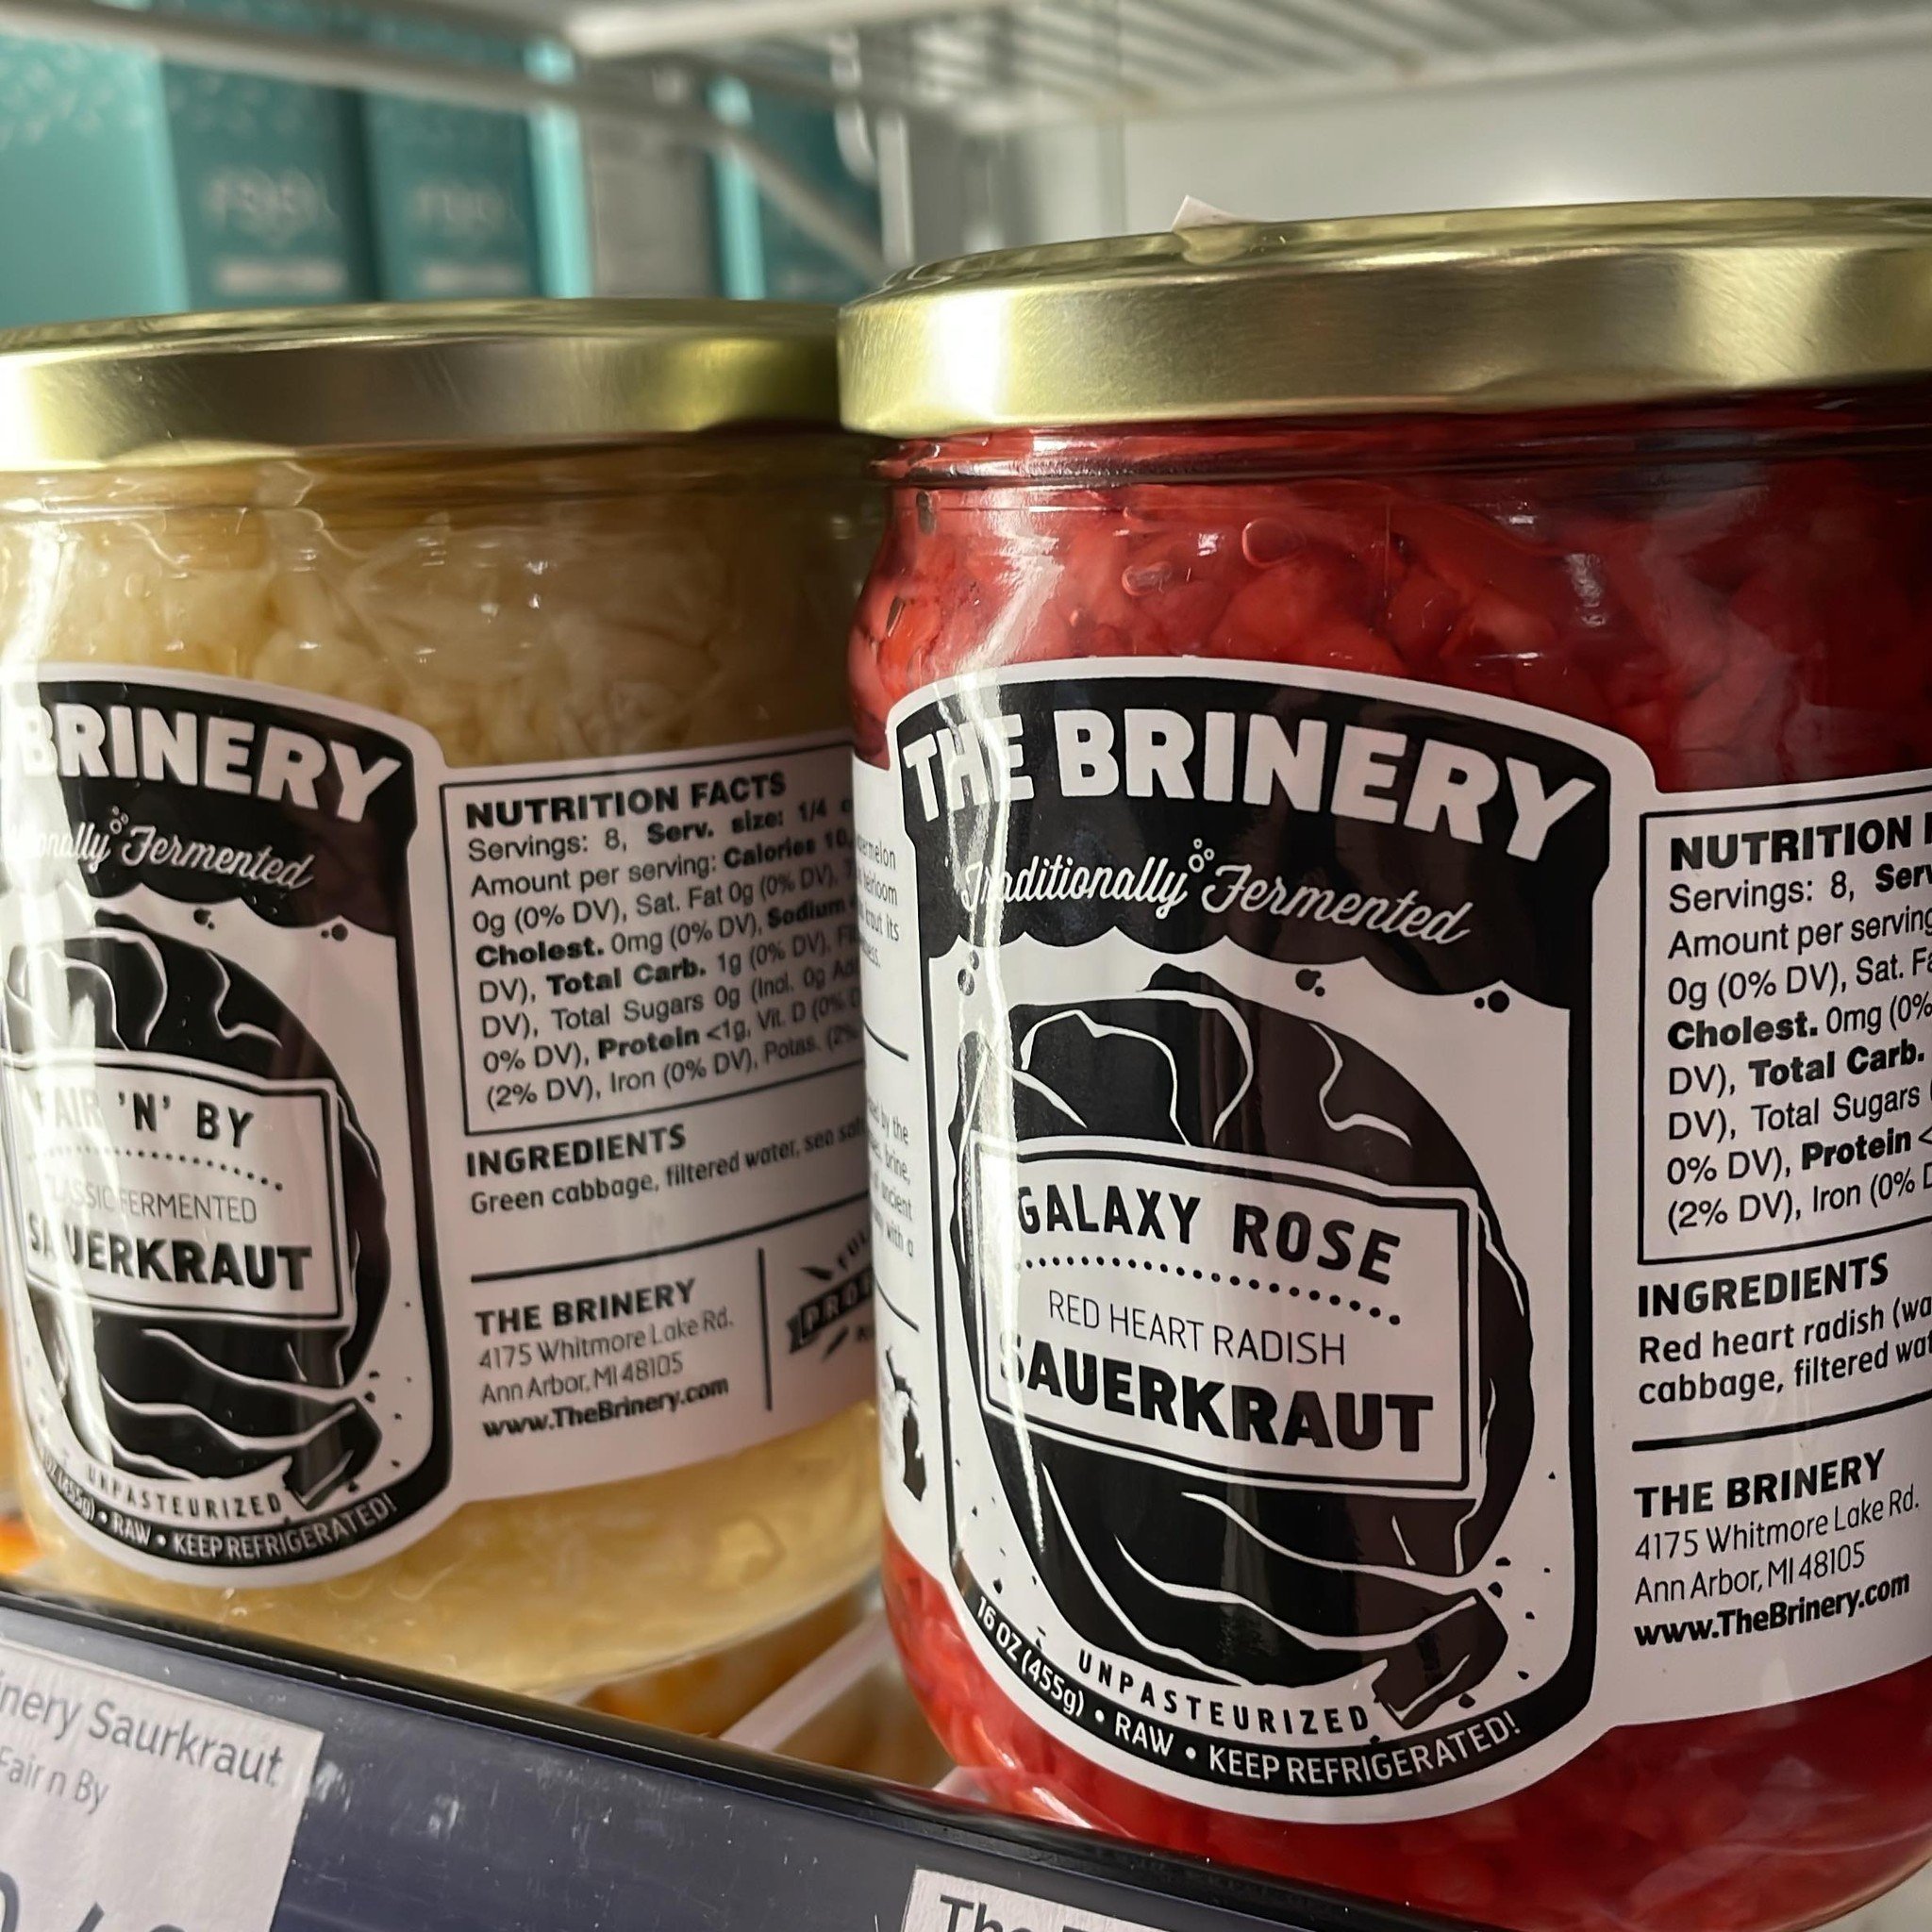 Sauerkraut is back in stock! Raw, unpasteurized sauerkraut is a product of Ann Arbor, MI based The Brinery. Get your good probiotics and prebiotics in the same container!

#redfoxmarket #downtownbigrapids #fermentedfoods